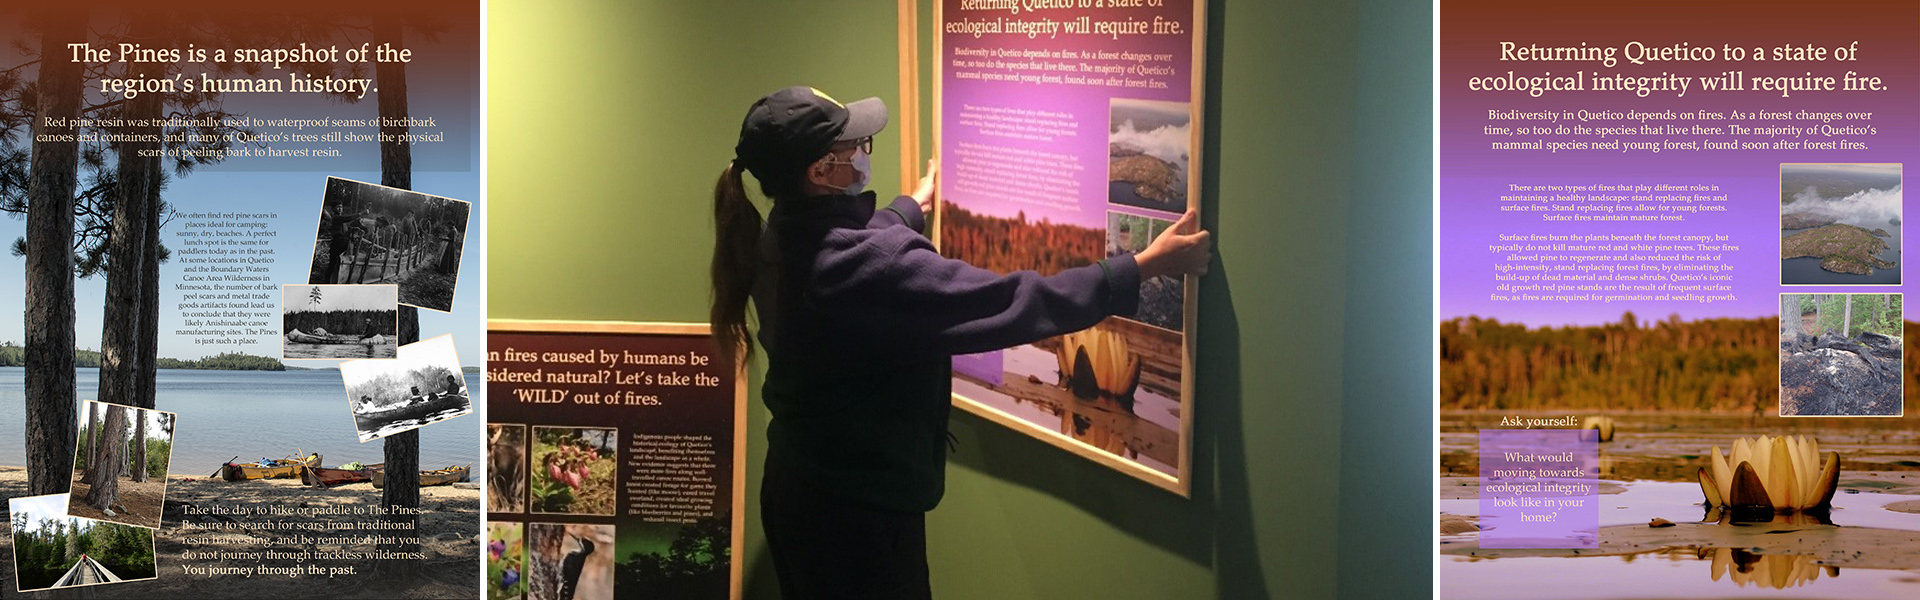 Red Pine Display at Quetico Provinical Park Visitor Centre